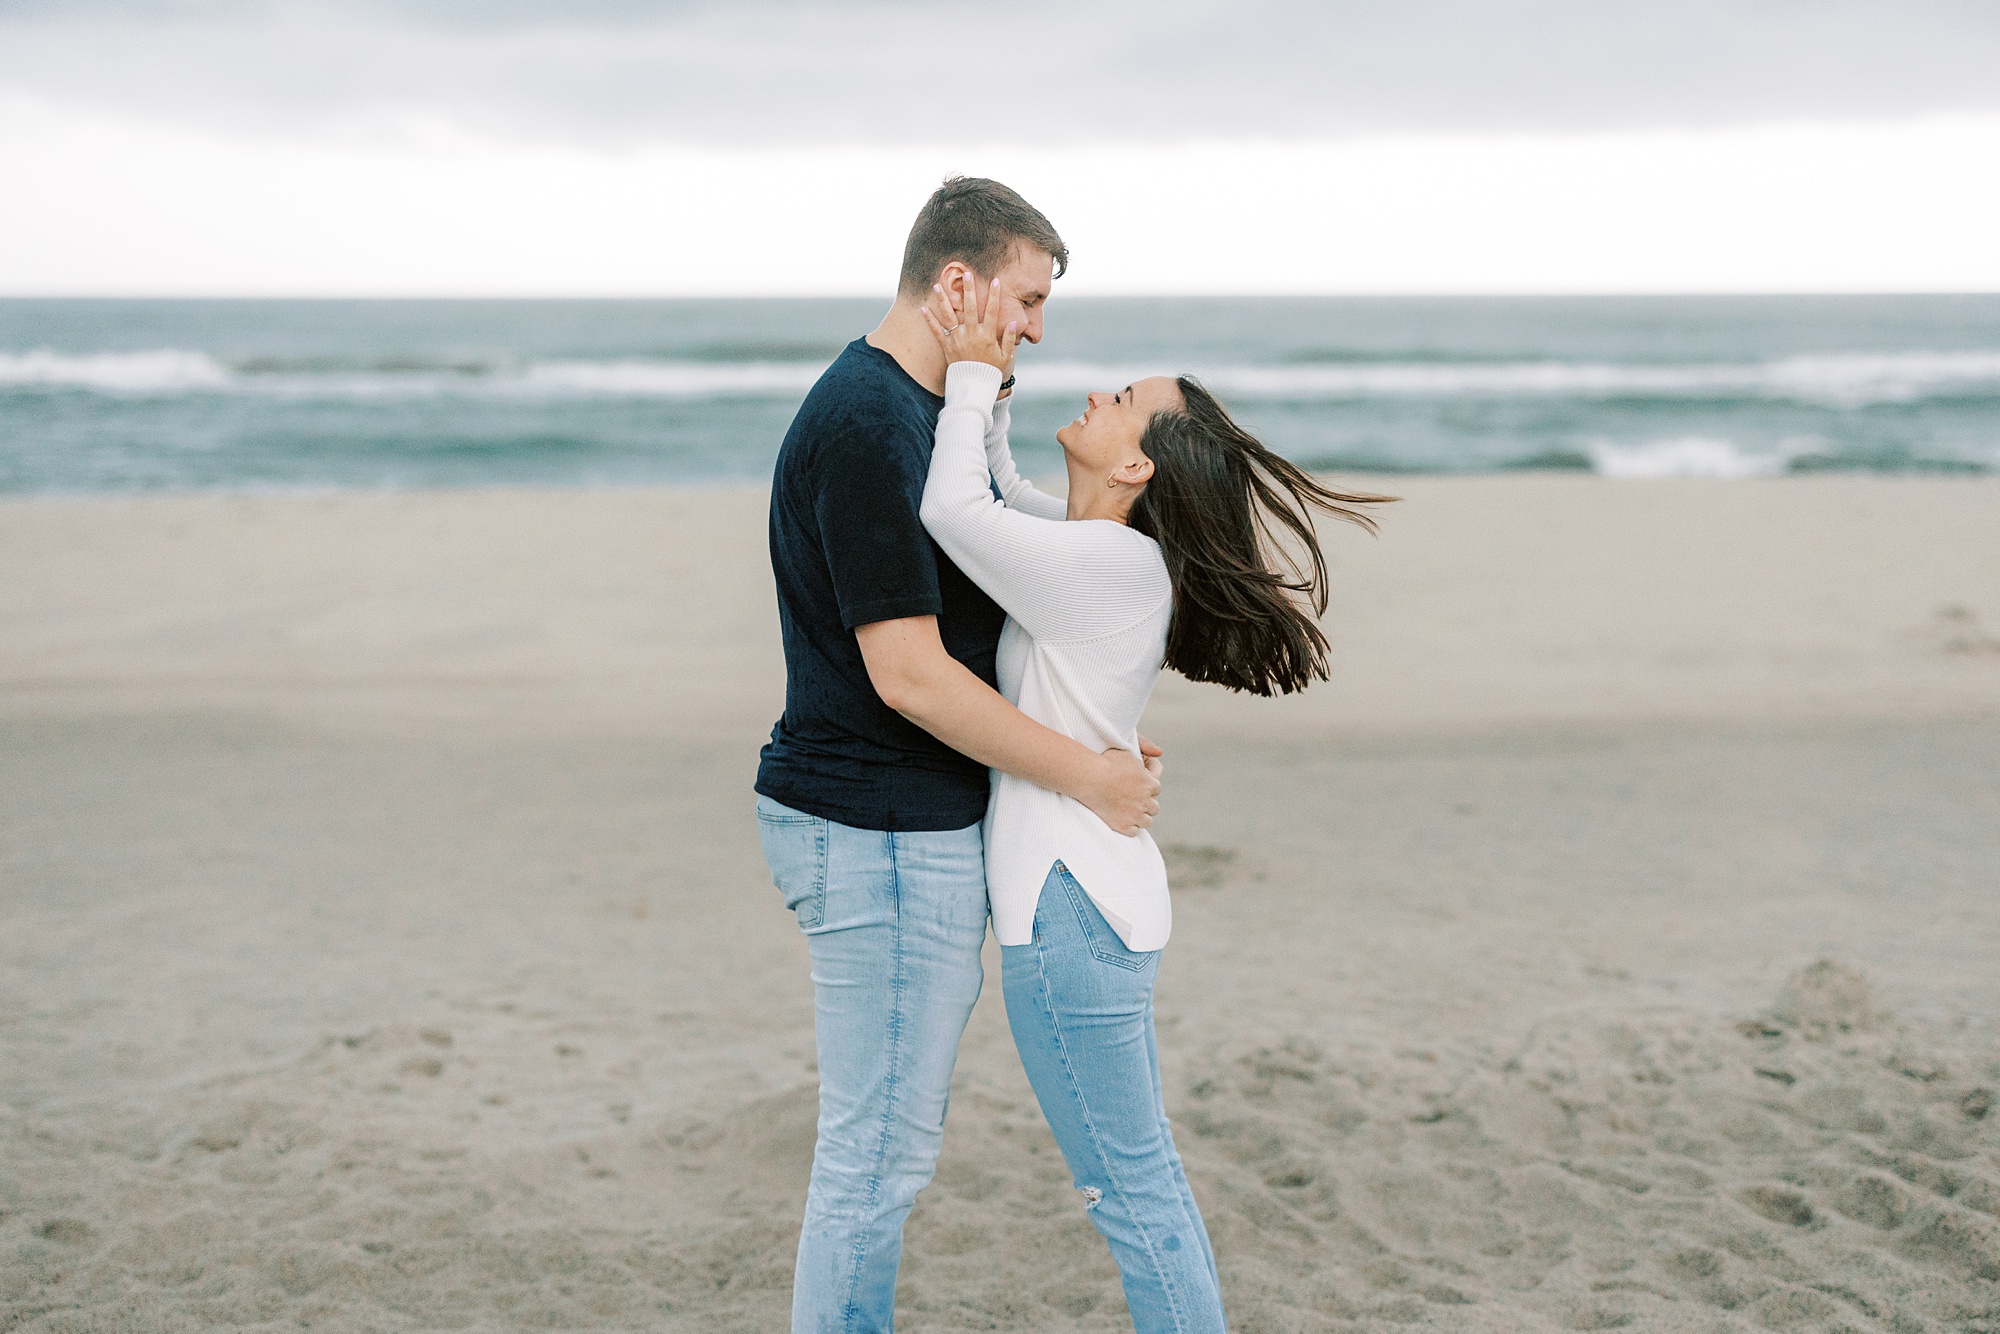 woman in white sweater looks up at man while wind blows their hair on beach 